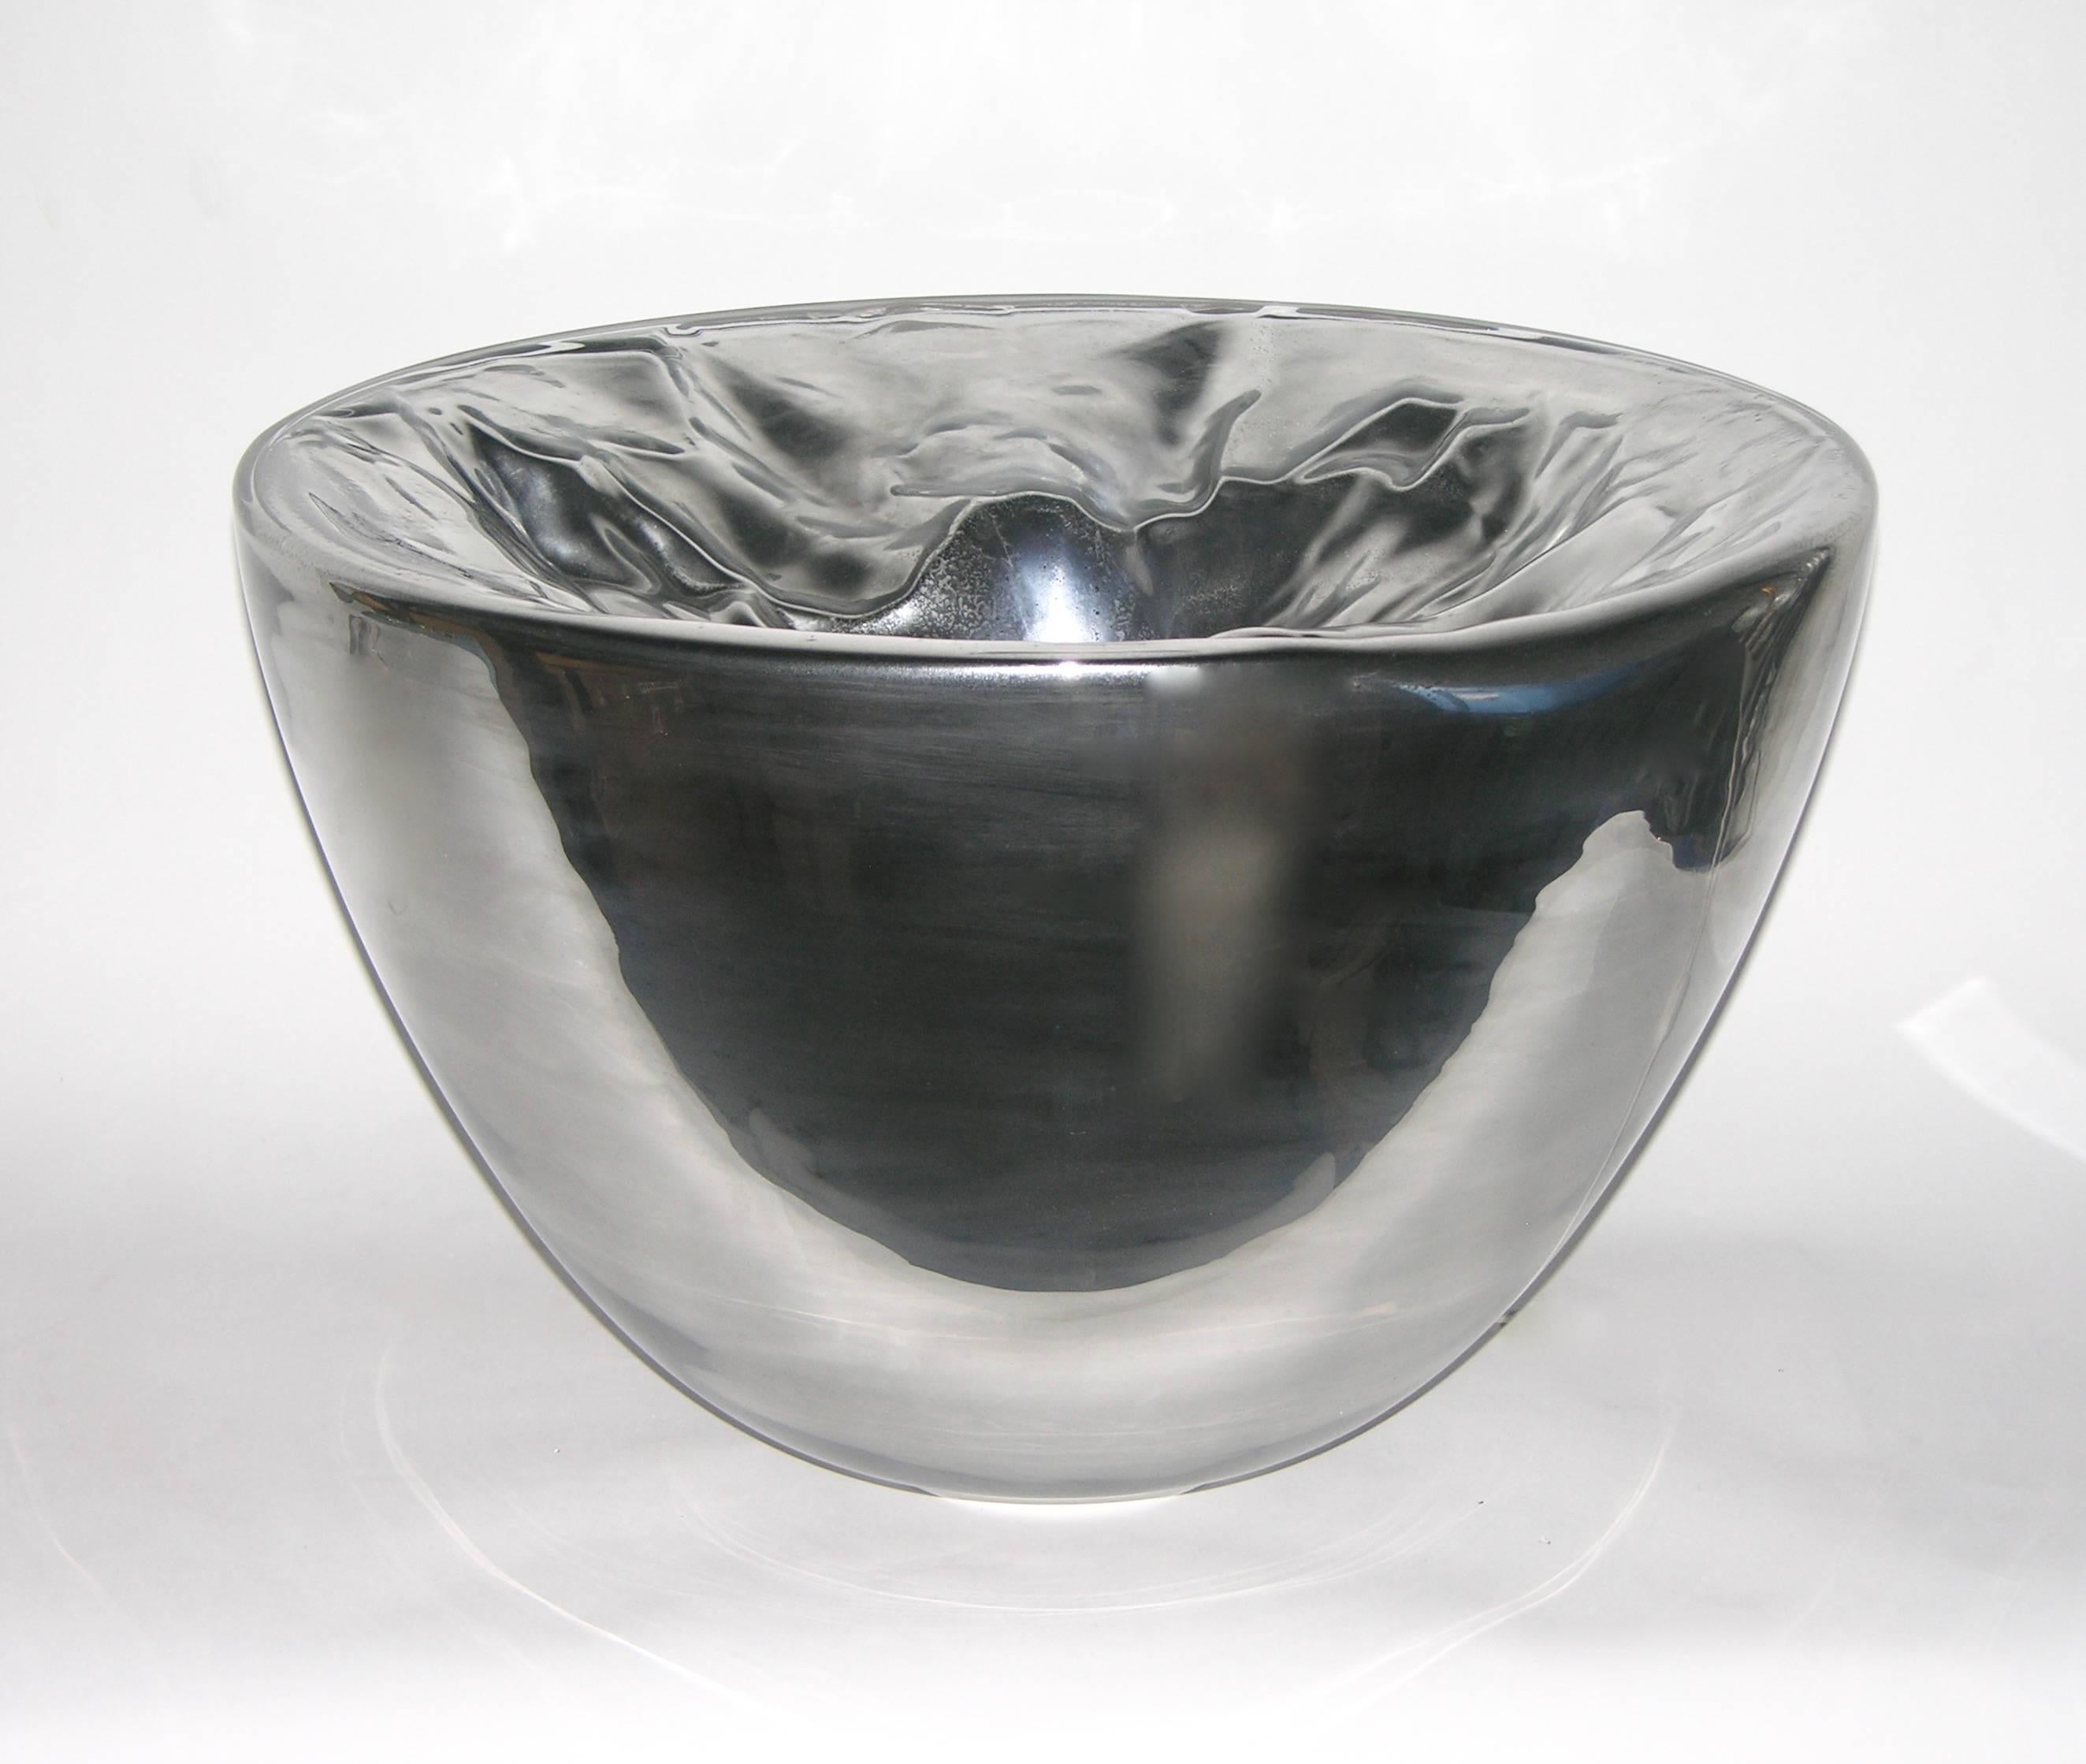 These monumental illuminated bowls by Carlo Nason in blown Murano glass, rarer in this silver version are decorated with a rock appearance, the glass roughly ridged and corrugated. They can be displayed also on the floor and their monumental size